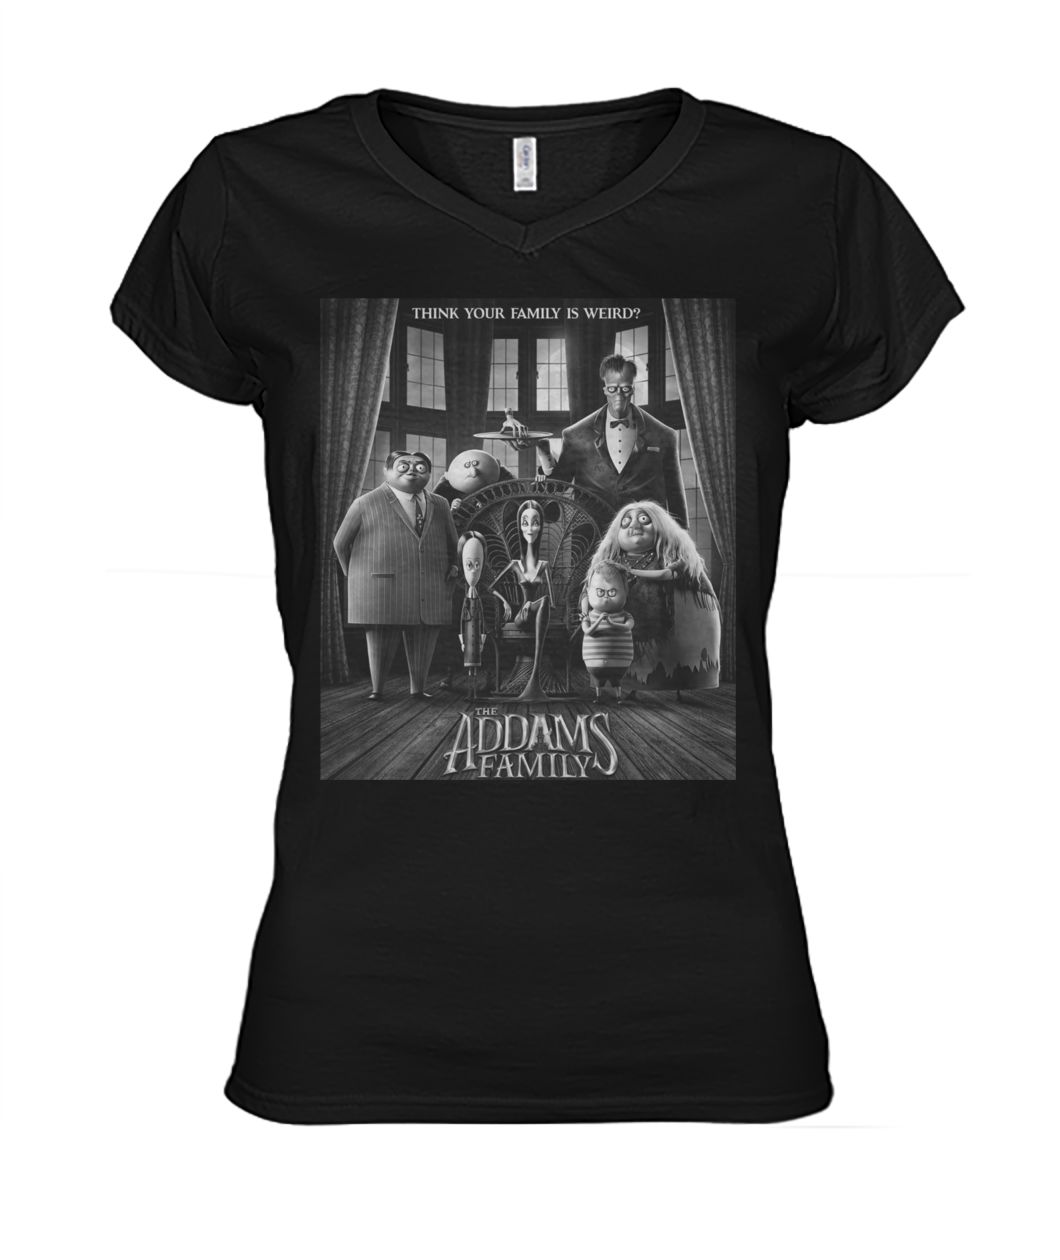 Think your family is weird the addams family women's v-neck